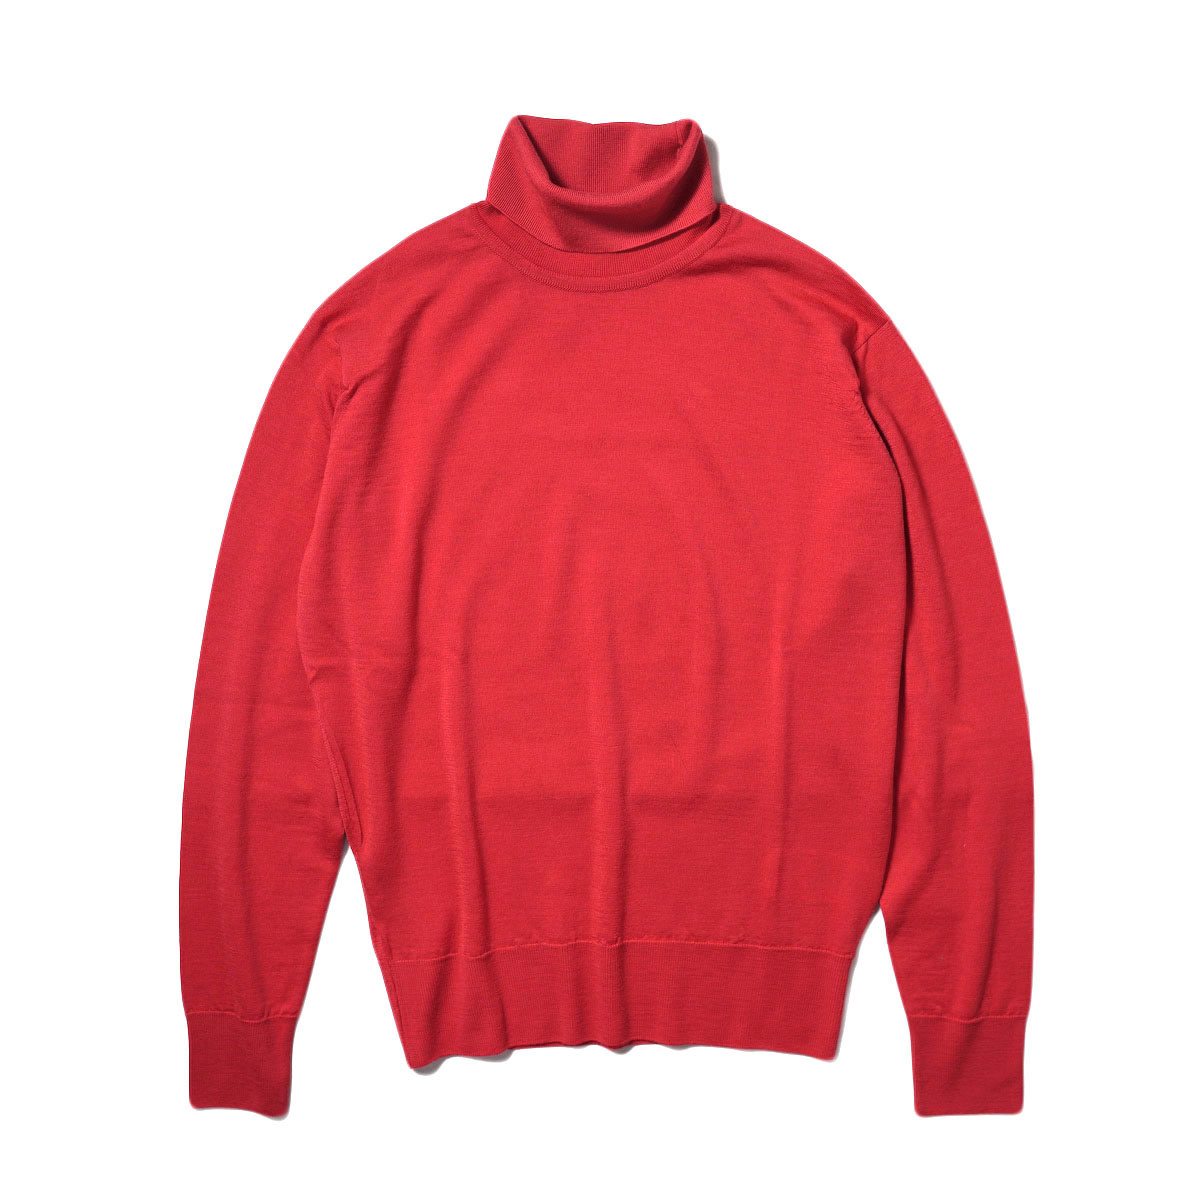 JOHN SMEDLEY / SWEATER RC LS (Holly Berry)